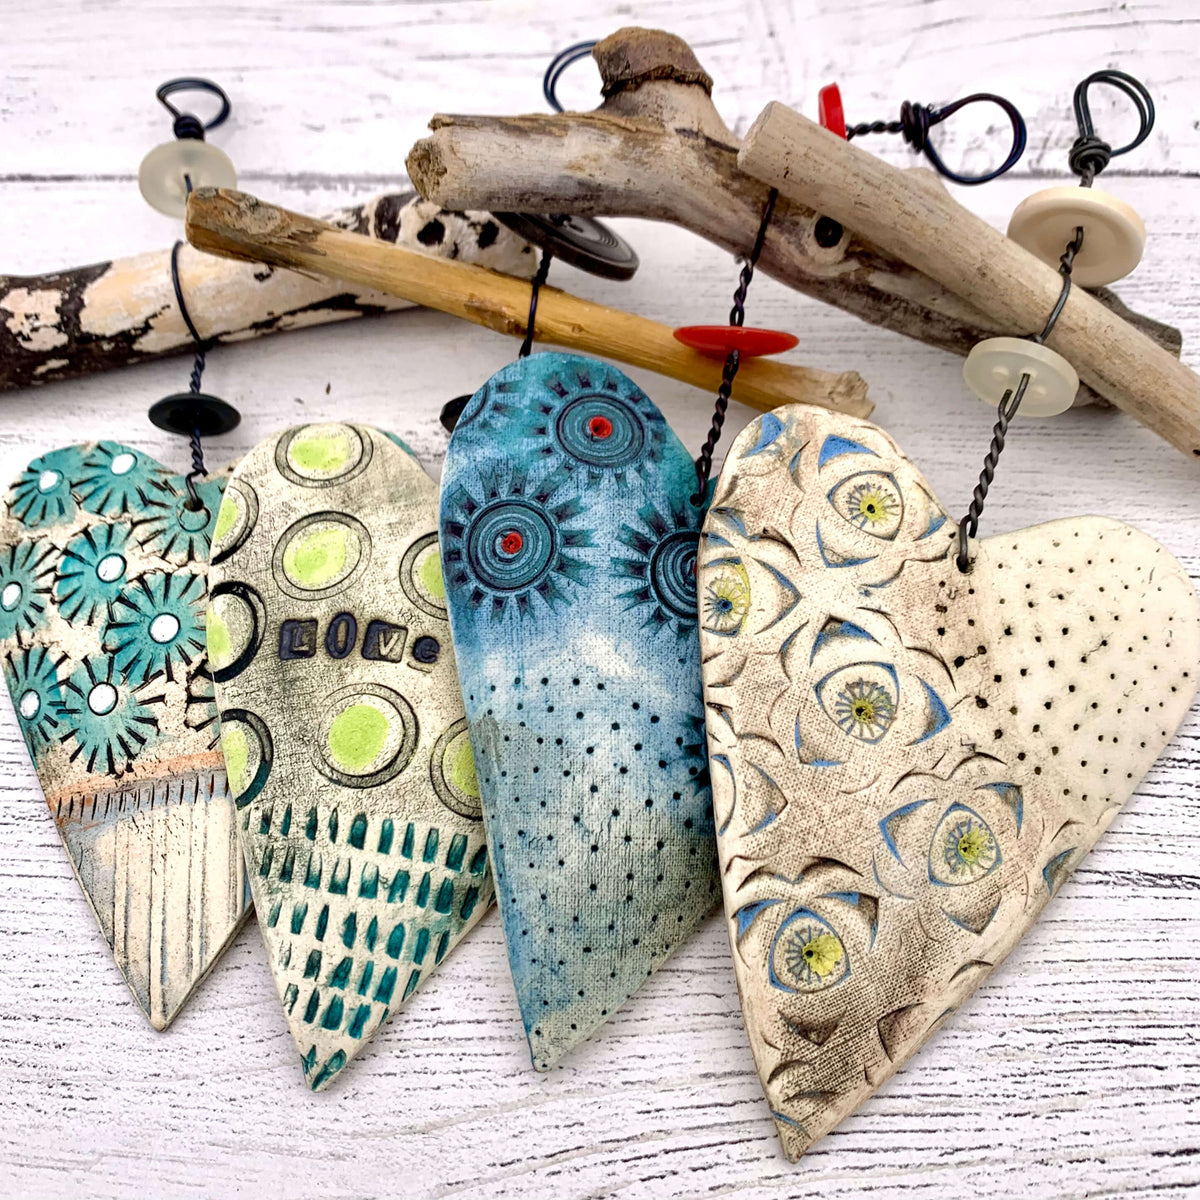 Handmade ceramic heart hanging decorations, by Shirley Vauvelle. These ceramic hearts hang on a thick piece of wire, with driftwood and buttons.